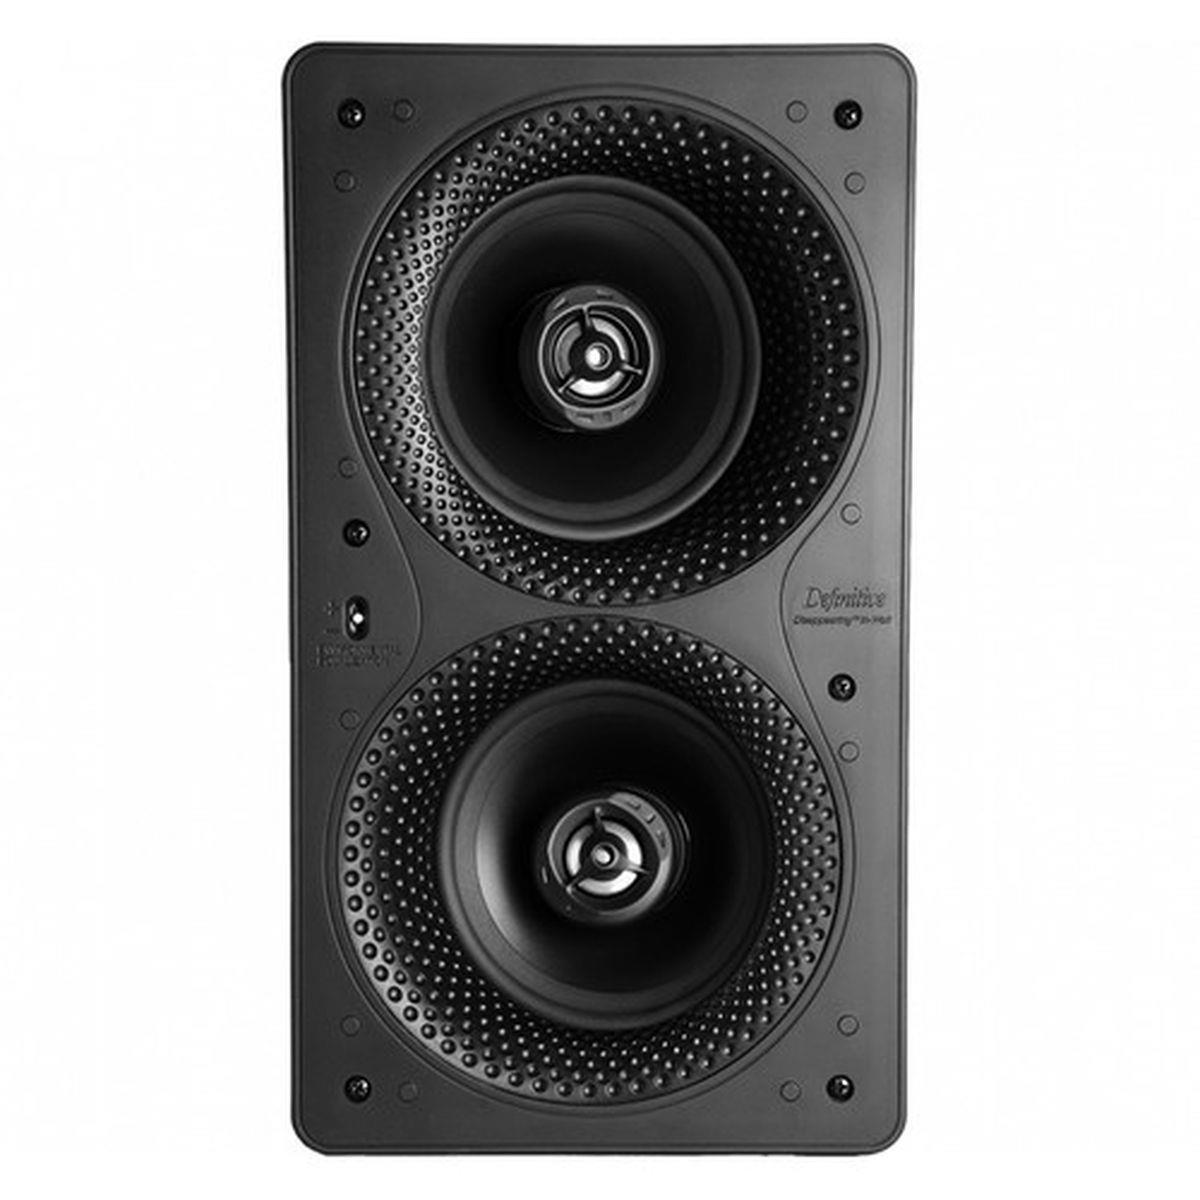 Definitive Technology Disappearing DI5.5BPS 5.25" InCeiling/Wall Bipolar Speaker -  UEZA